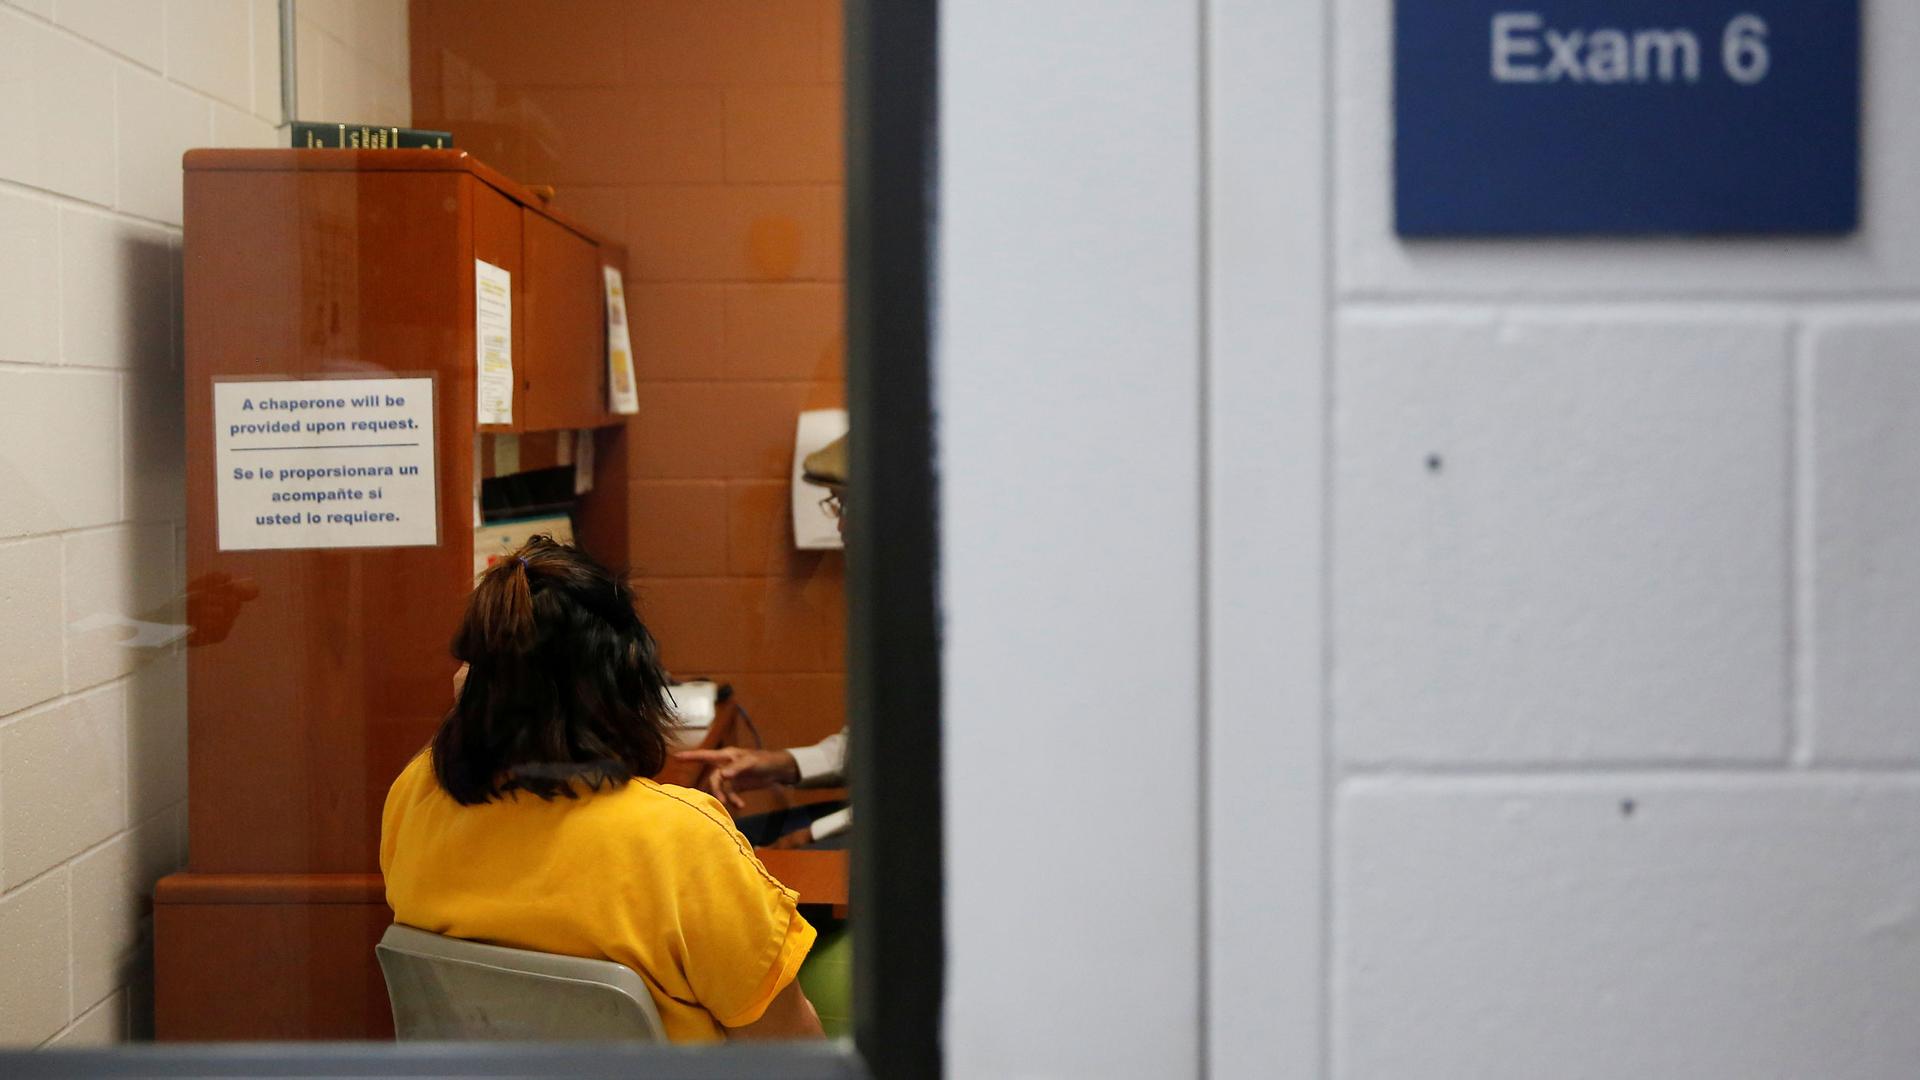 A detainee talks with an employee in an exam room in the medial unit during a media tour at Northwest ICE Processing Center